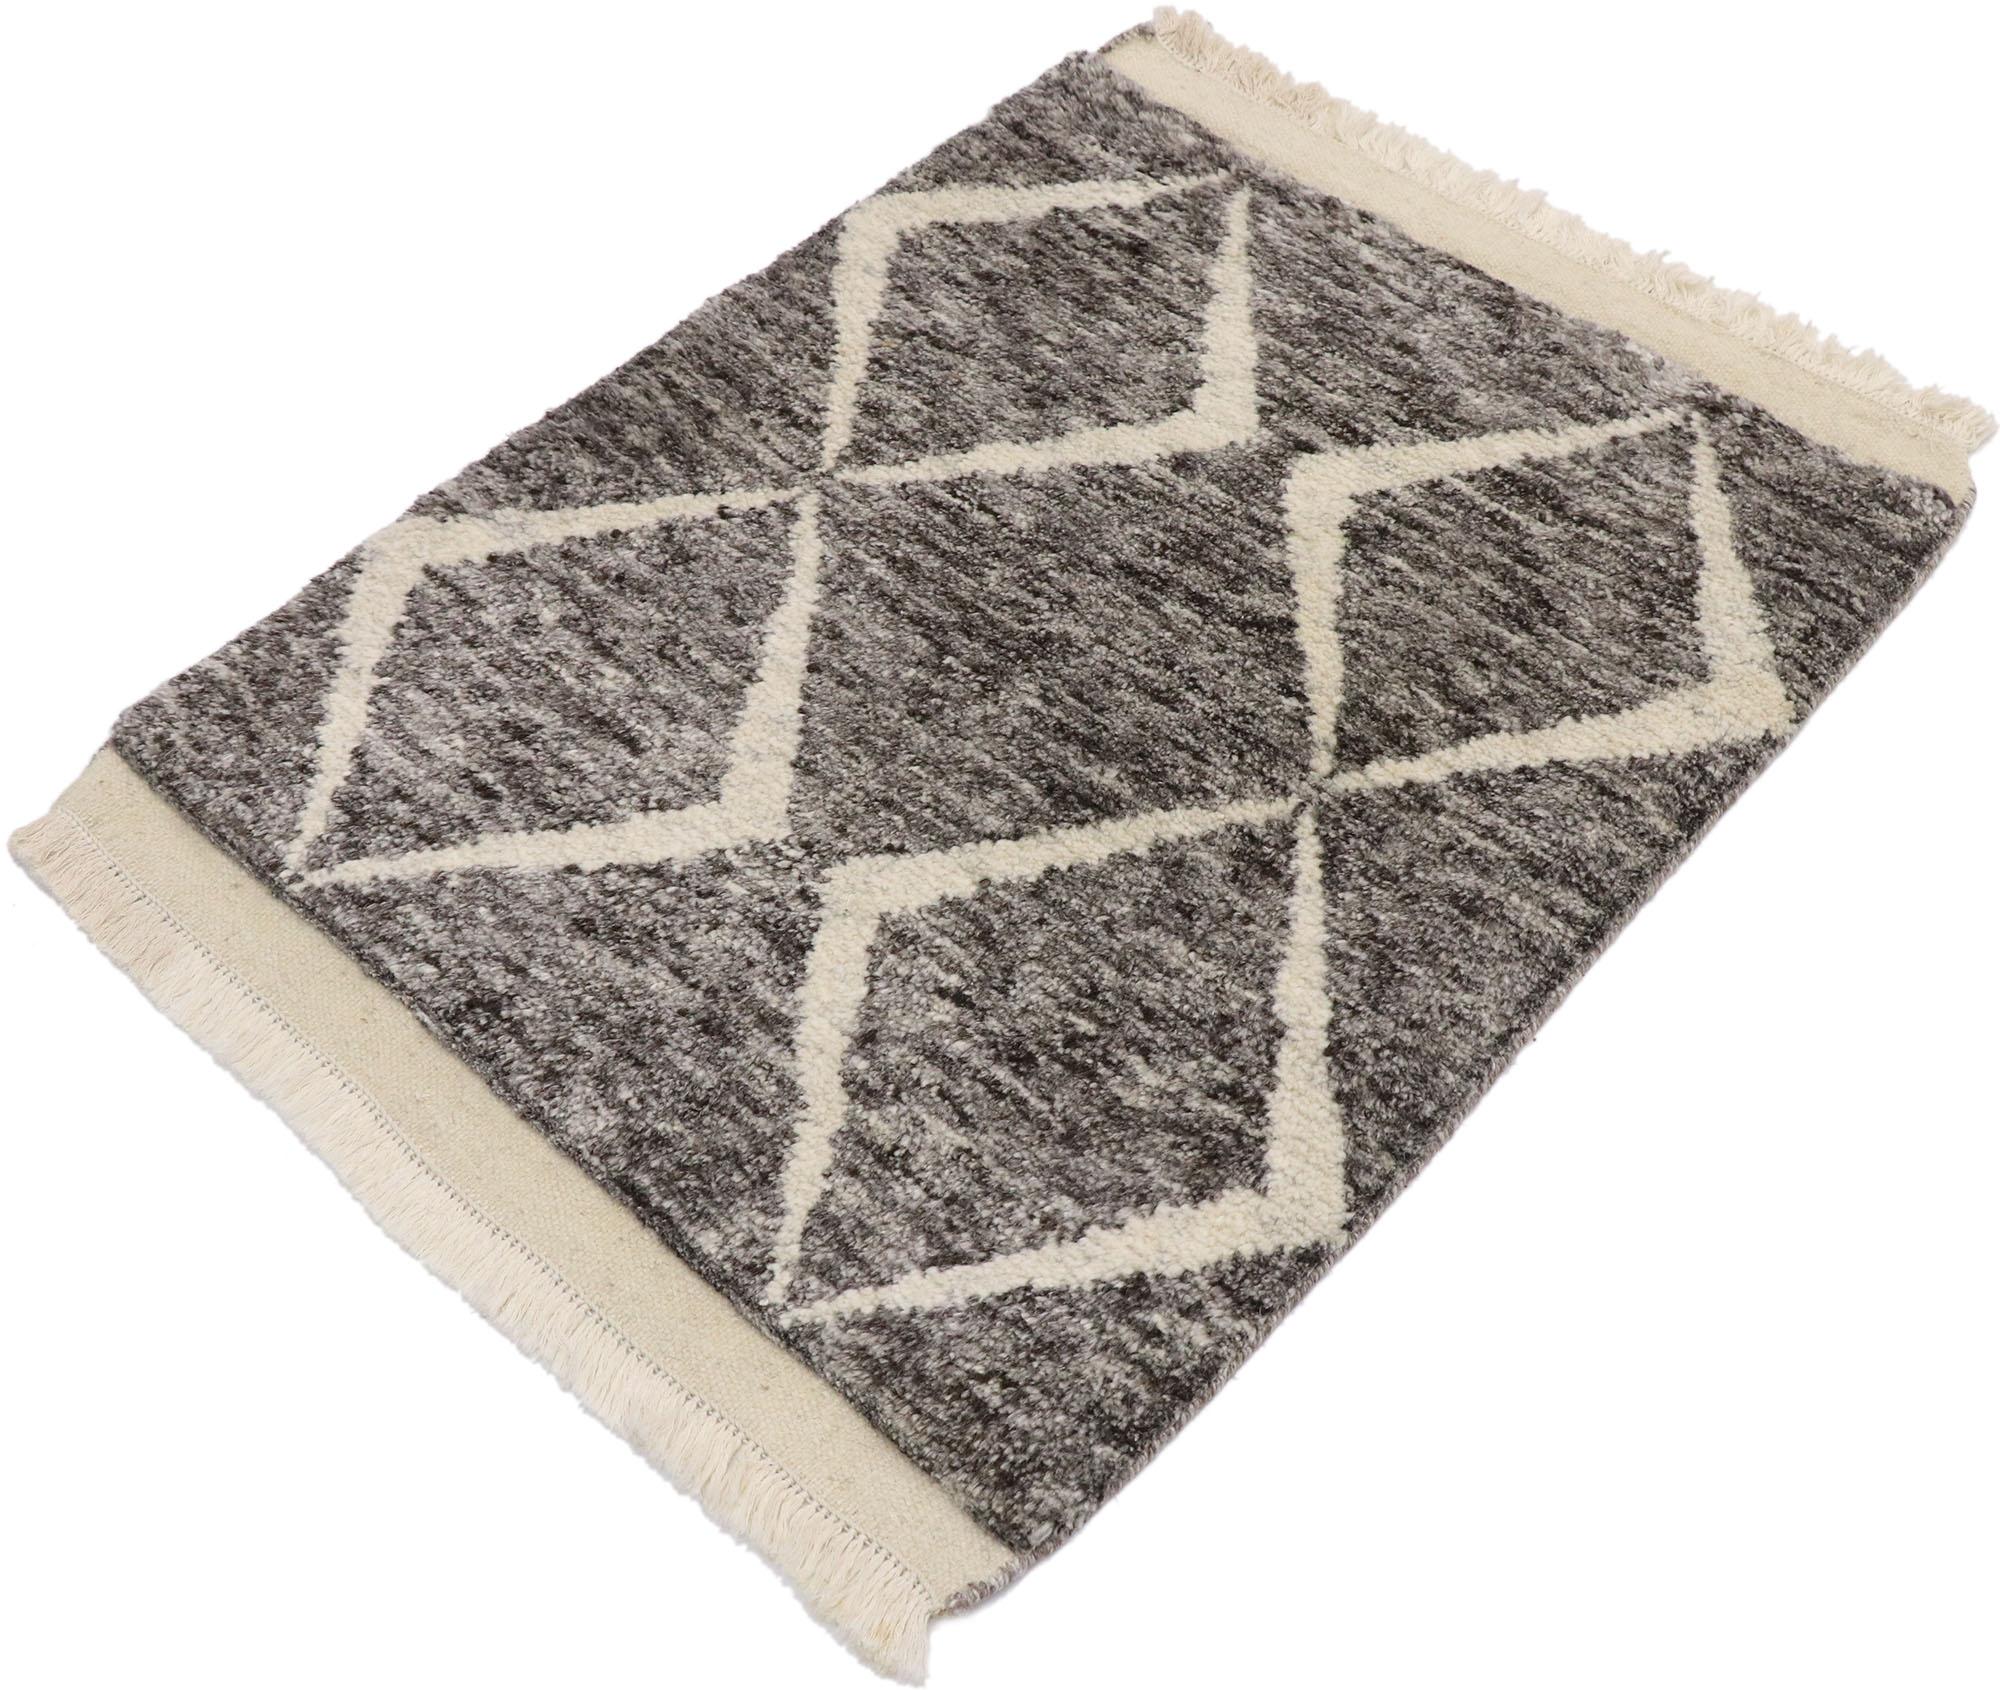 30605 Small Modern Moroccan Rug, 02'00 x 02'10. This hand-knotted wool contemporary Moroccan-style rug presents a mesmerizing double diamond pattern, where beige lines gracefully traverse a richly striated charcoal gray field. The interplay of these